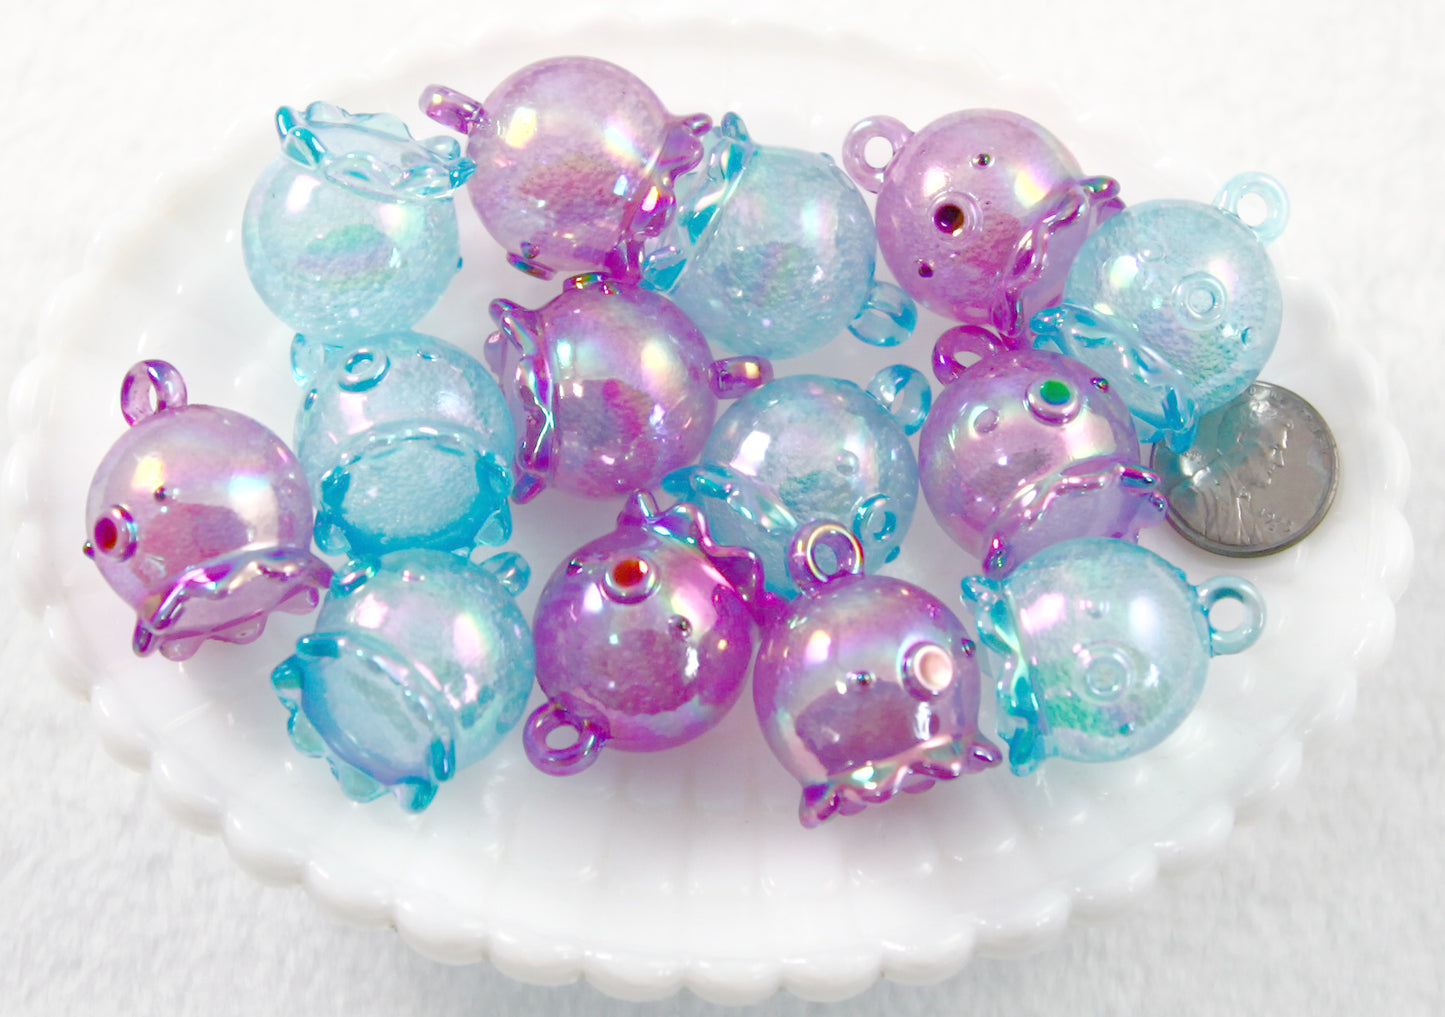 Octopus Charms - 30mm Chunky Pastel Octopus Resin Charms or Pendants - 4 pc set